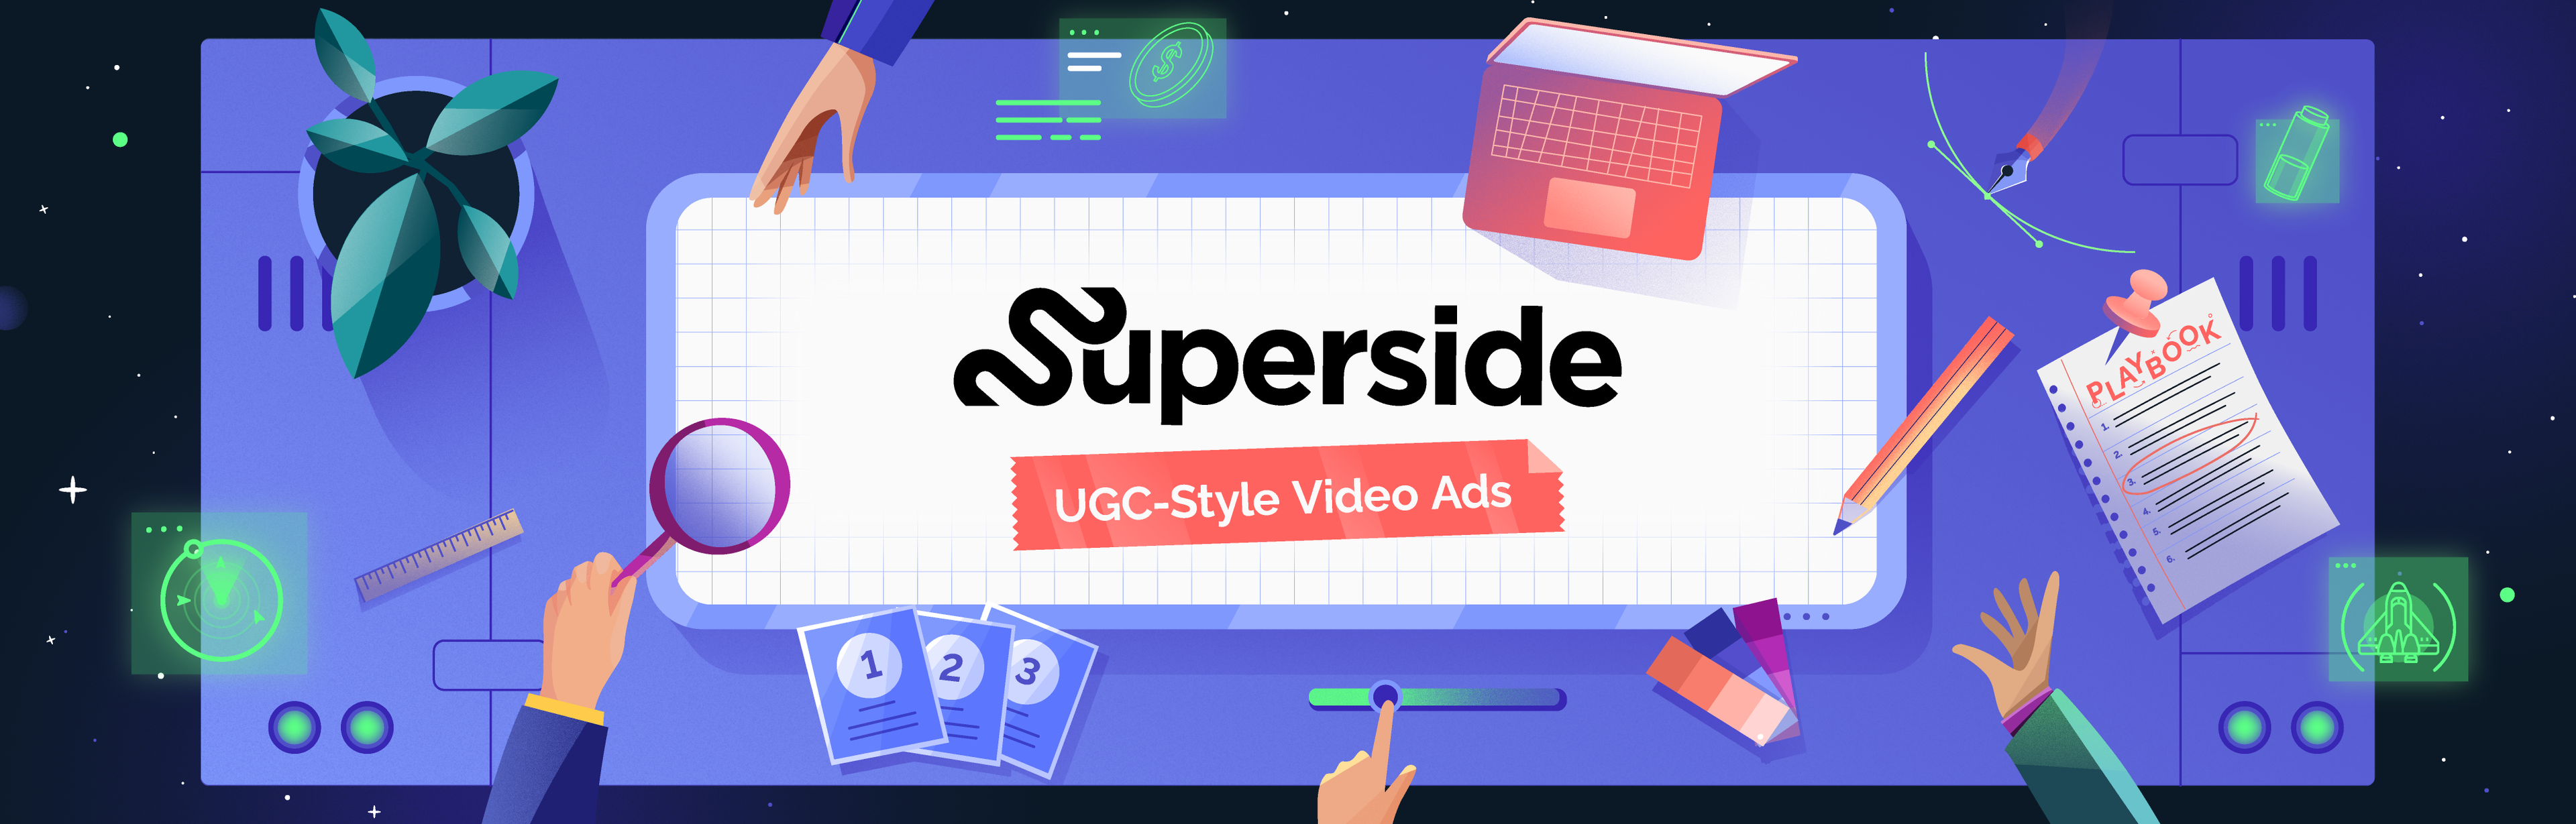 Playbook: Low-Budget, High-Impact UGC Video Ads - Superside